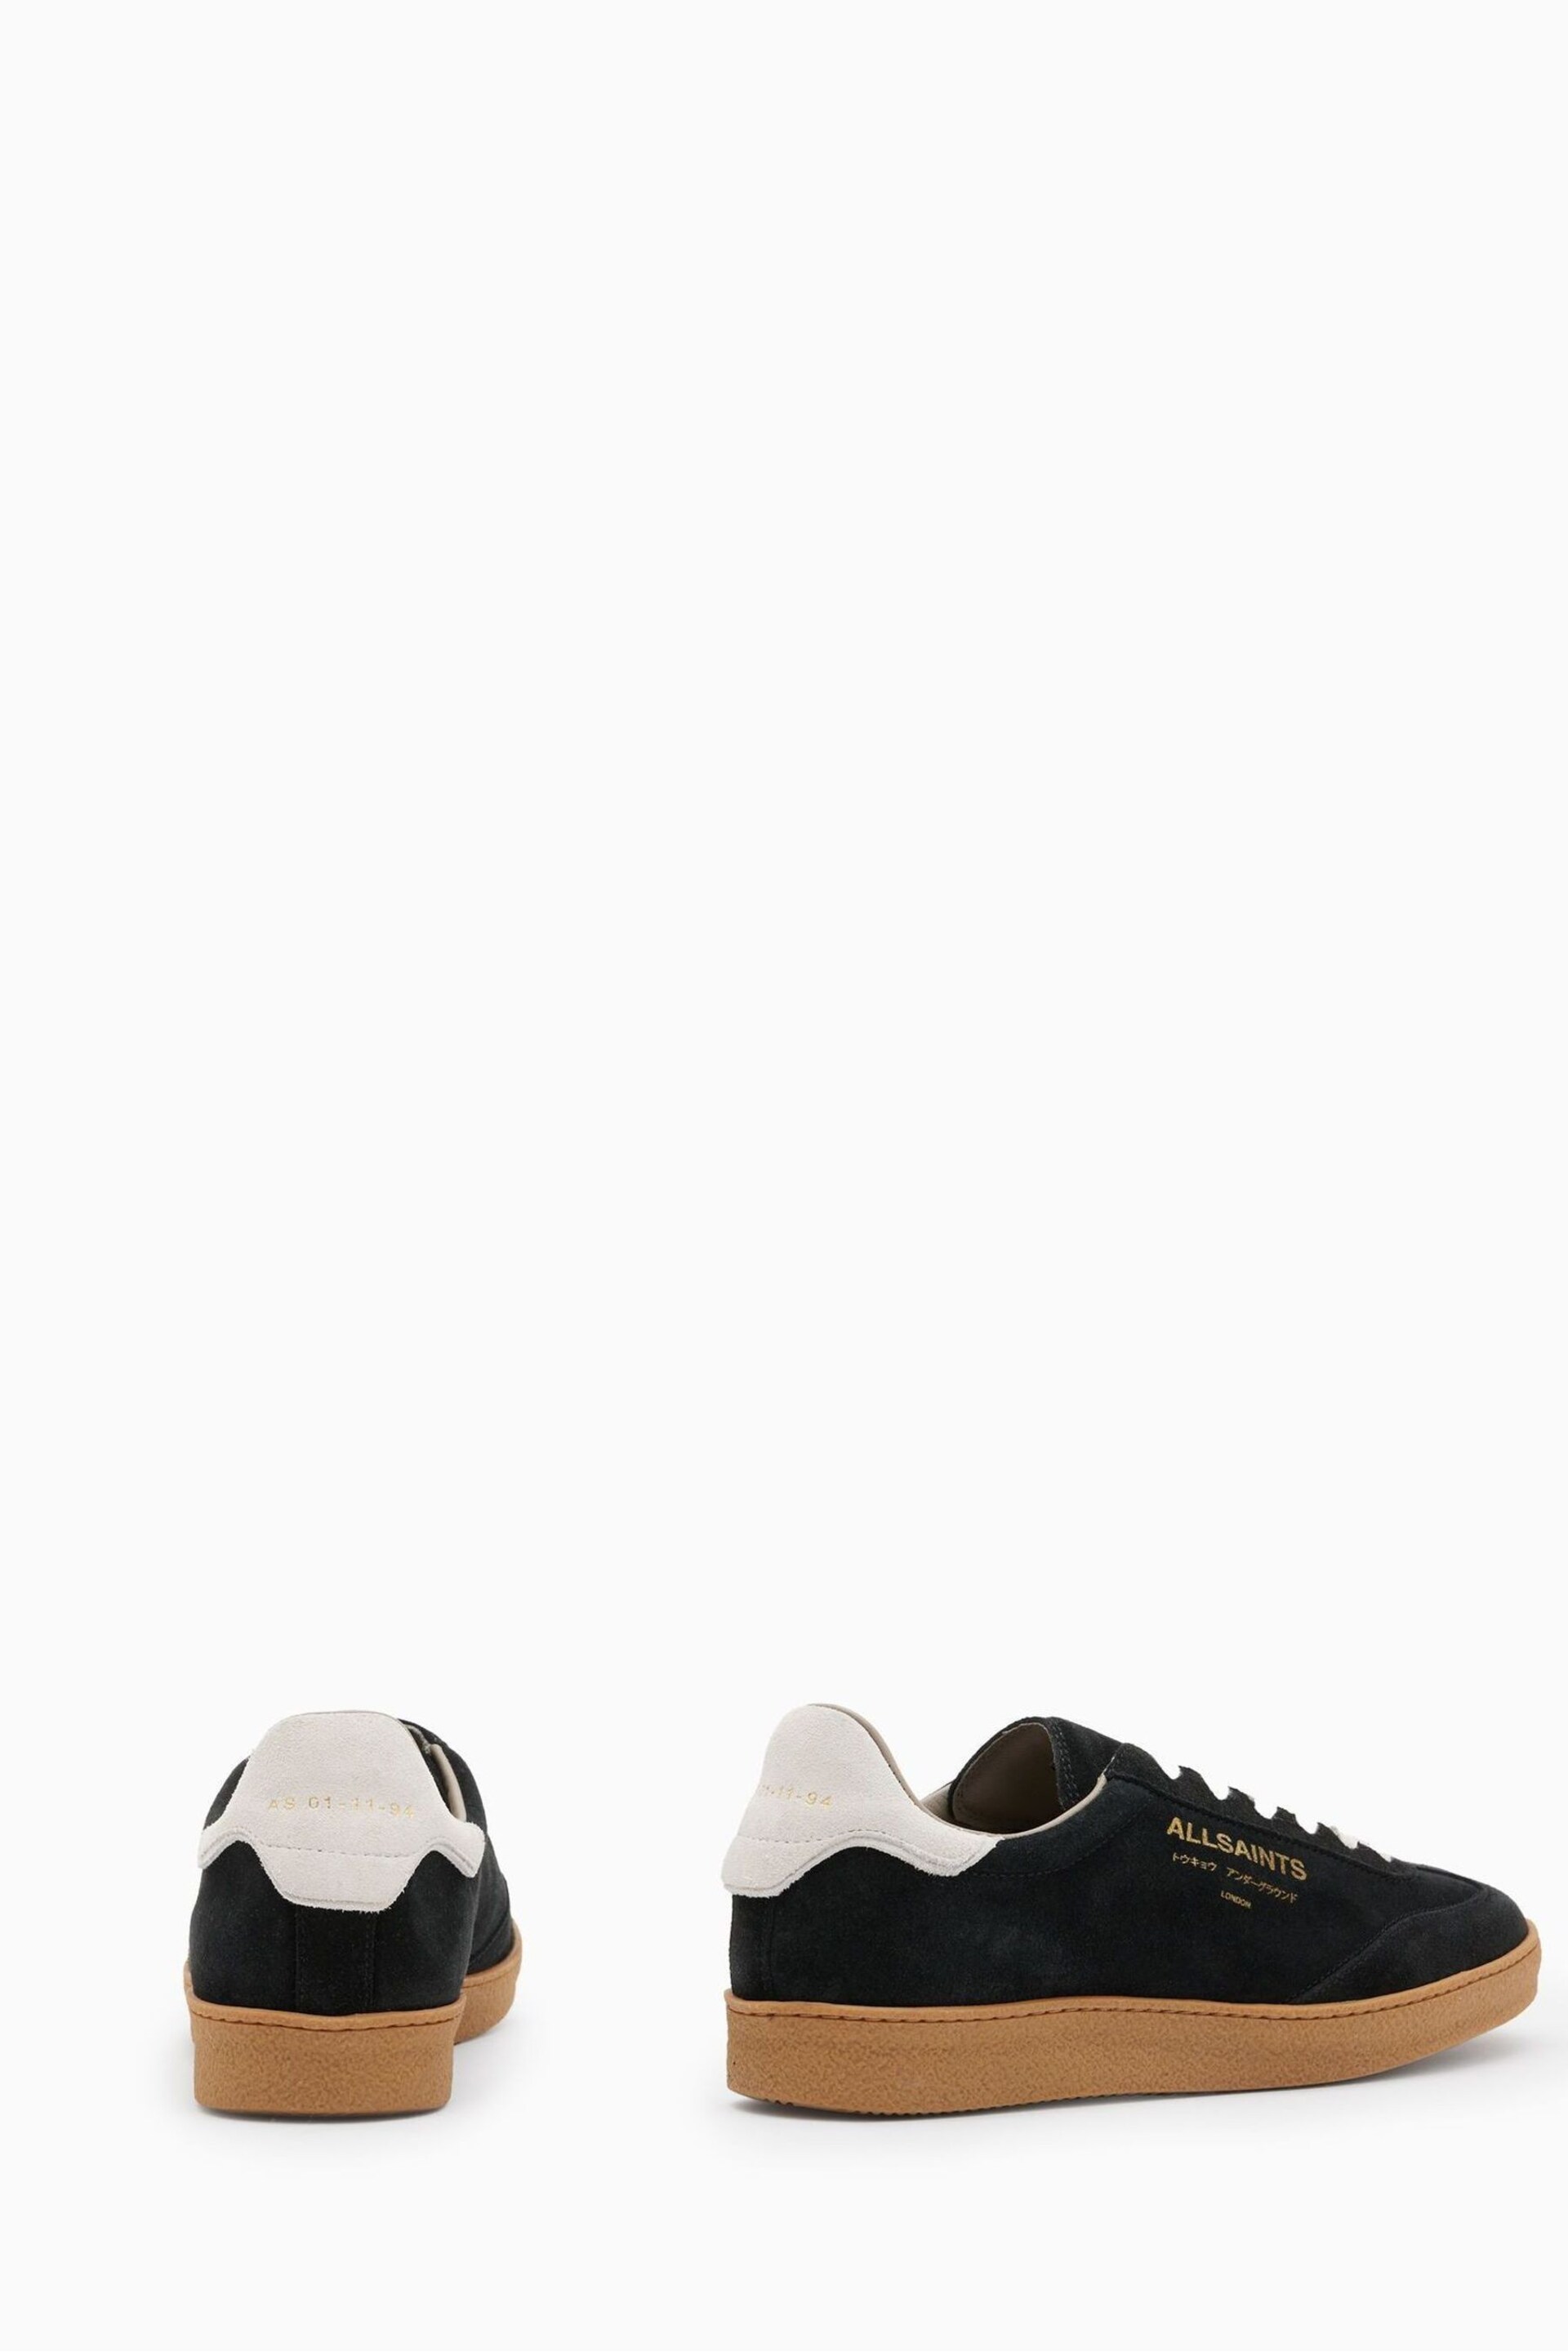 AllSaints Black Suede Thelma Sneakers - Image 3 of 5